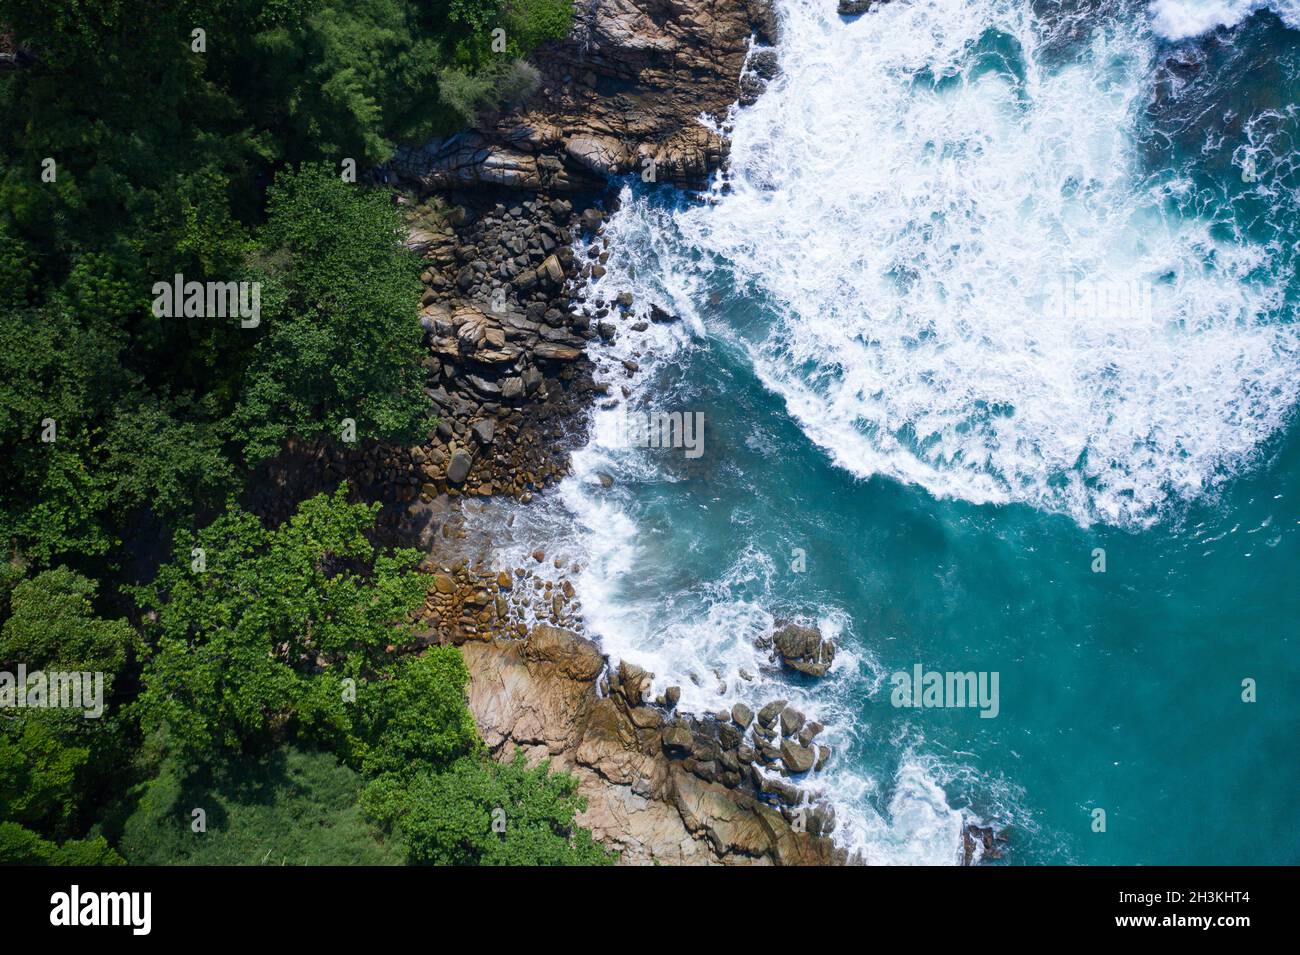 Aerial top view of ocean's beautiful waves and rocky coast with greenery Stock Photo